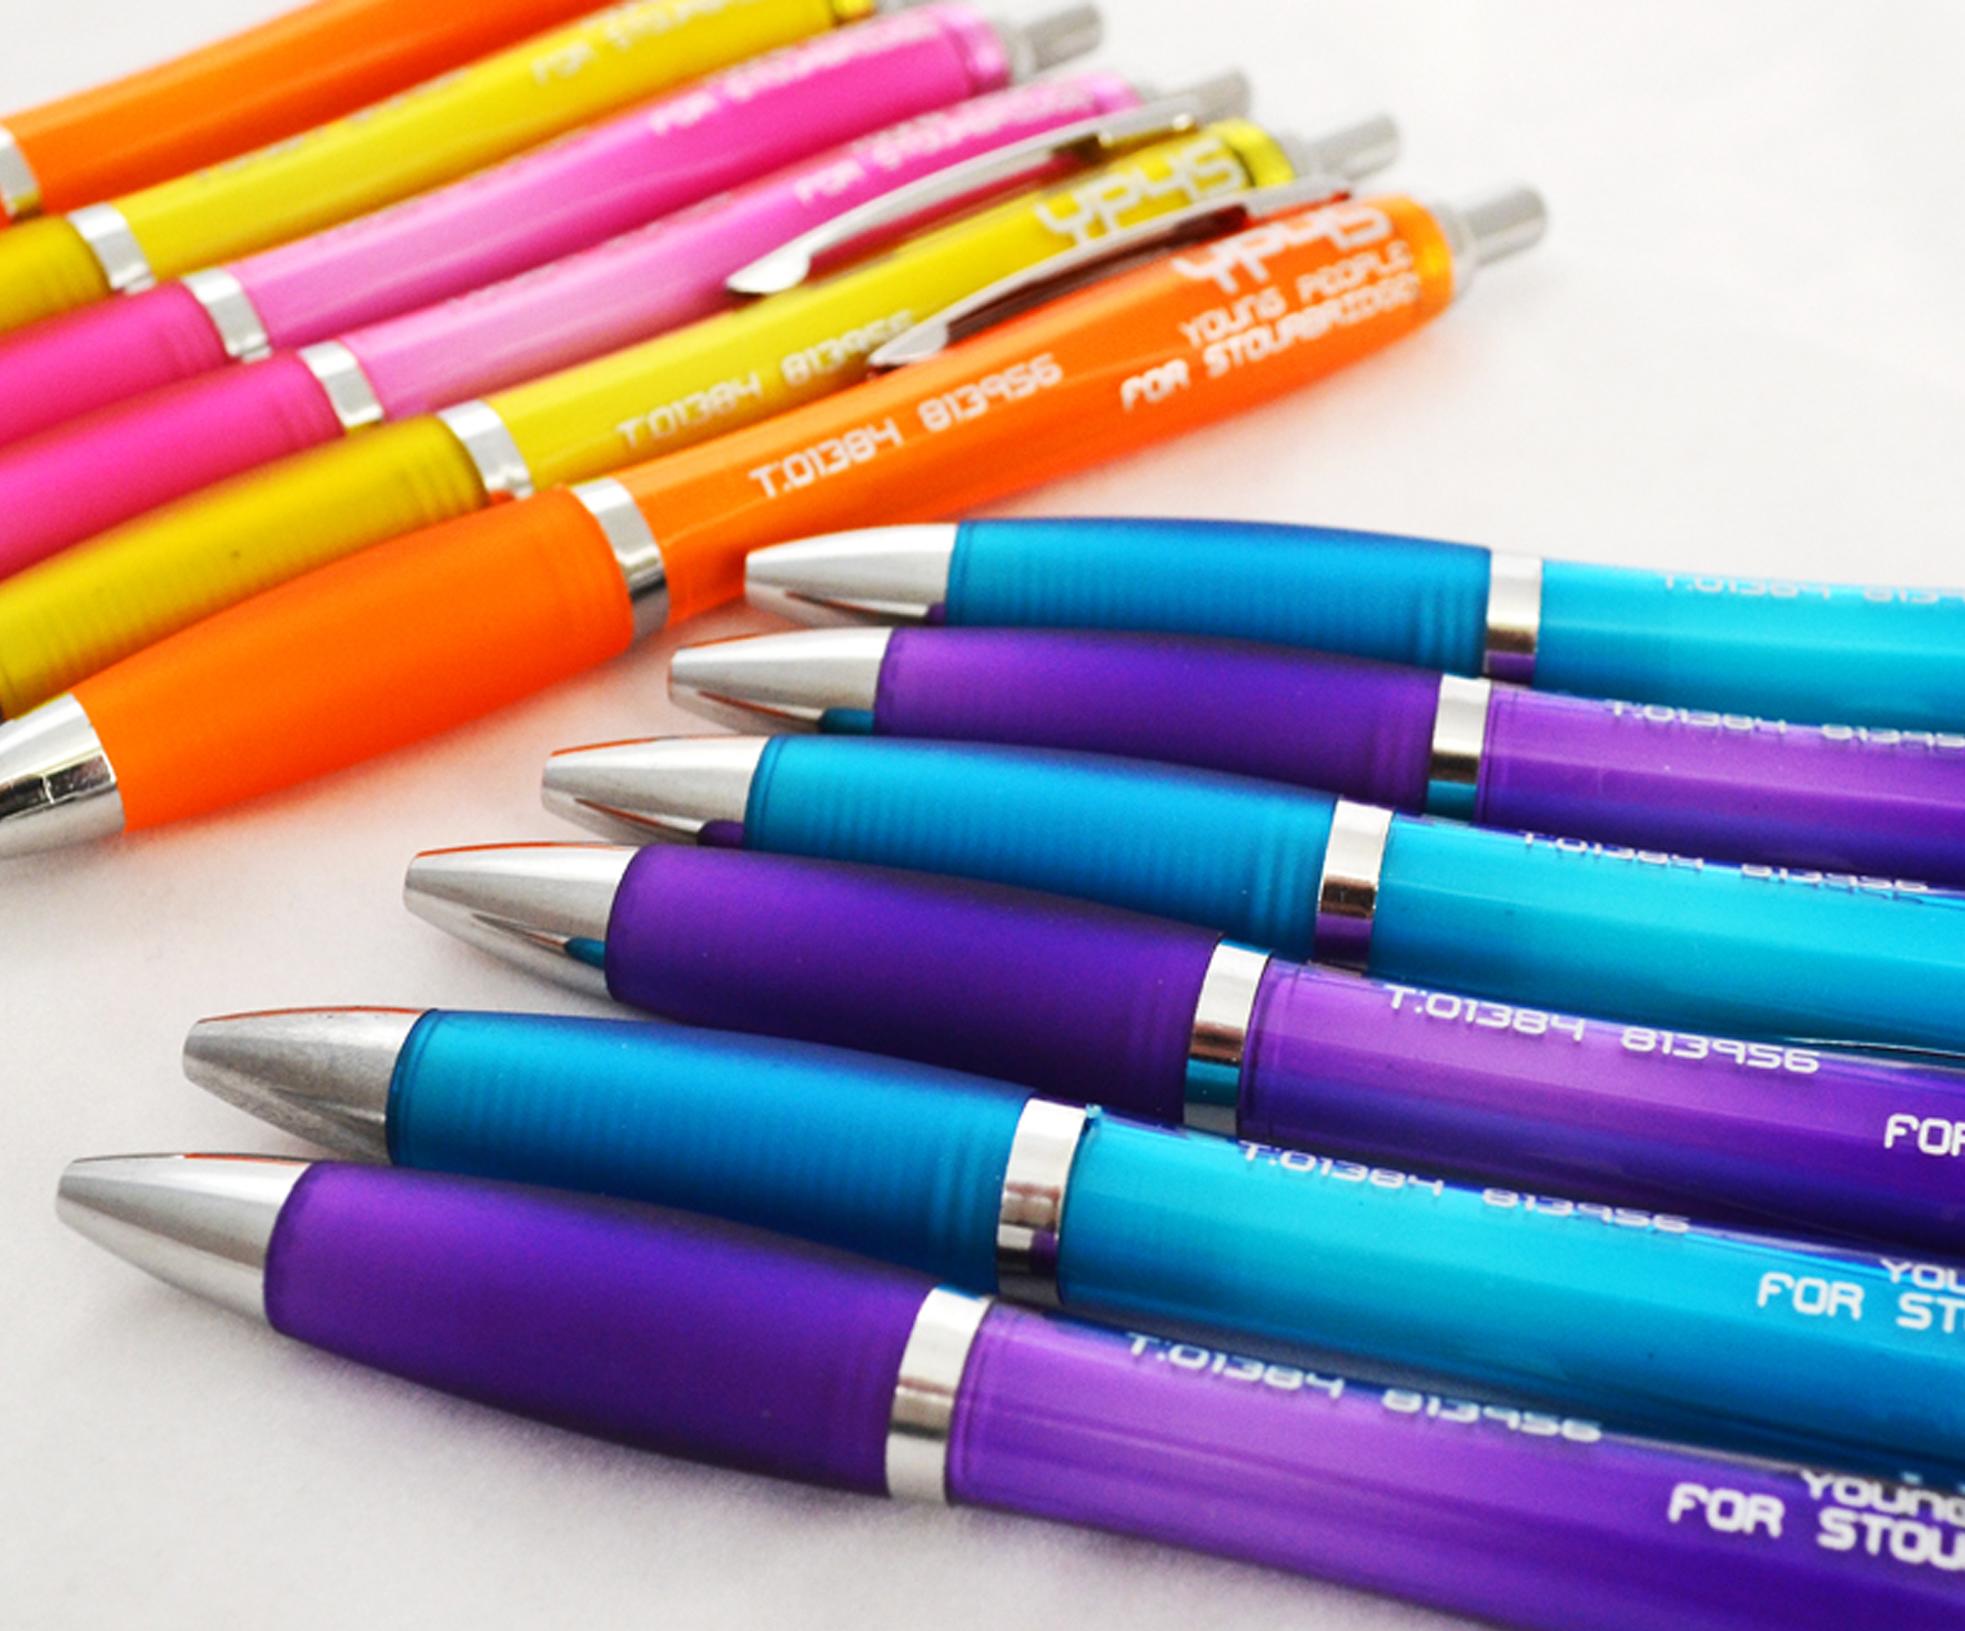 Colour mix pens with same logo to all